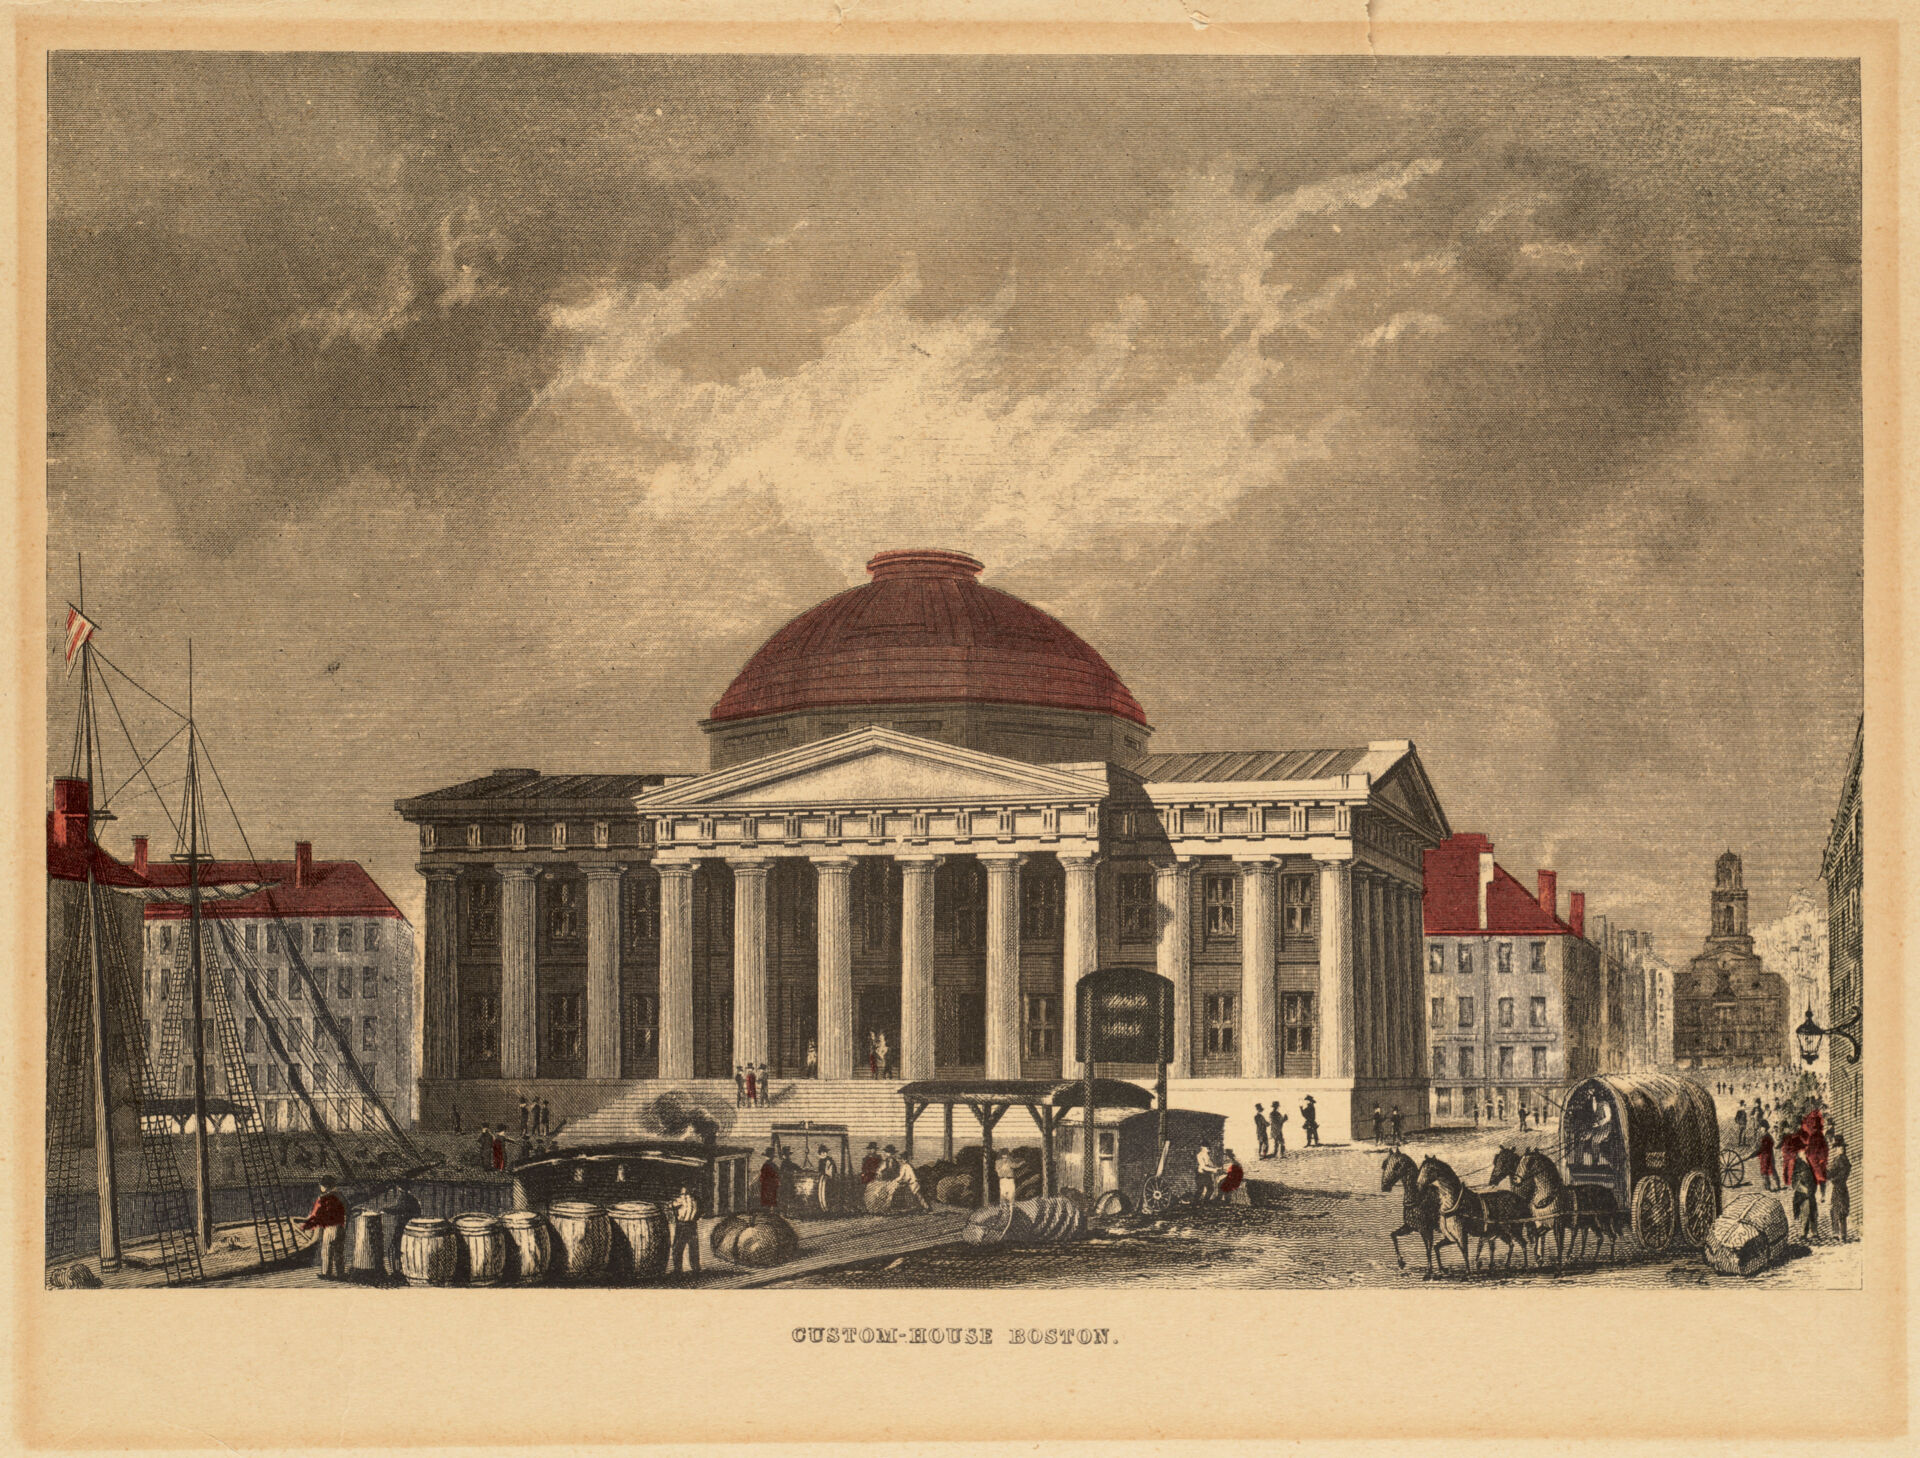 Print from between 1850 and 1855 showing the Boston Custom House in its original construction.